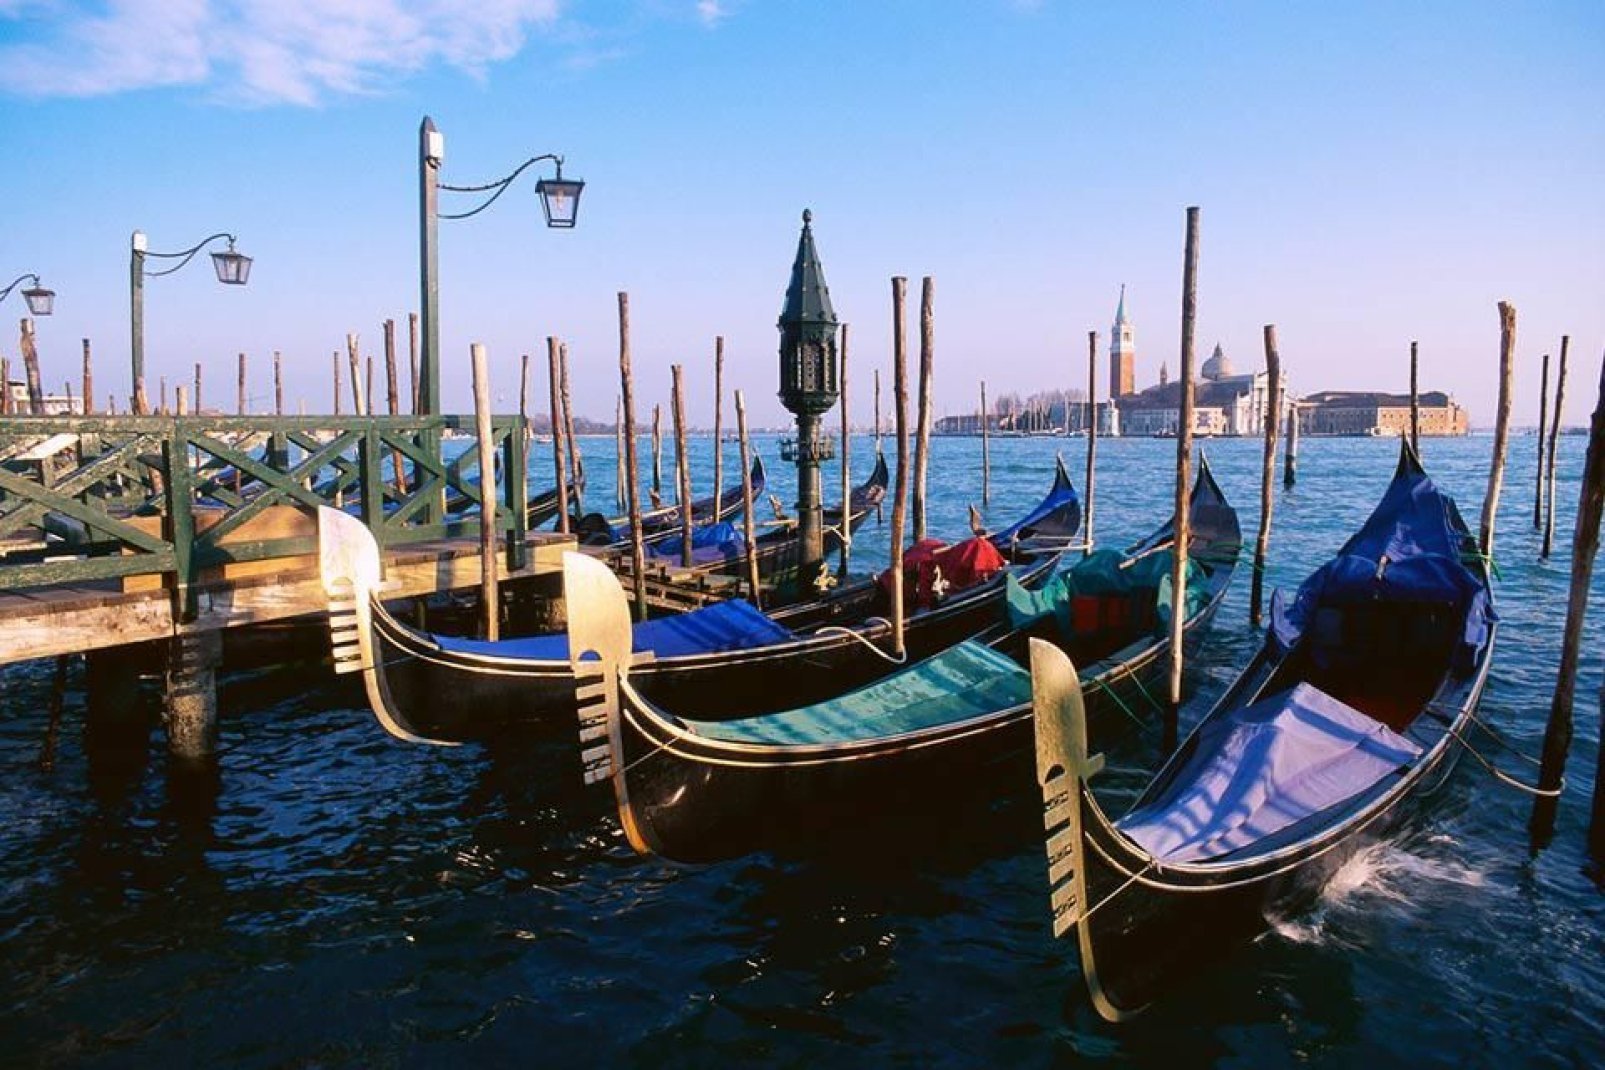 These special boats have become one of the symbols of Venice.